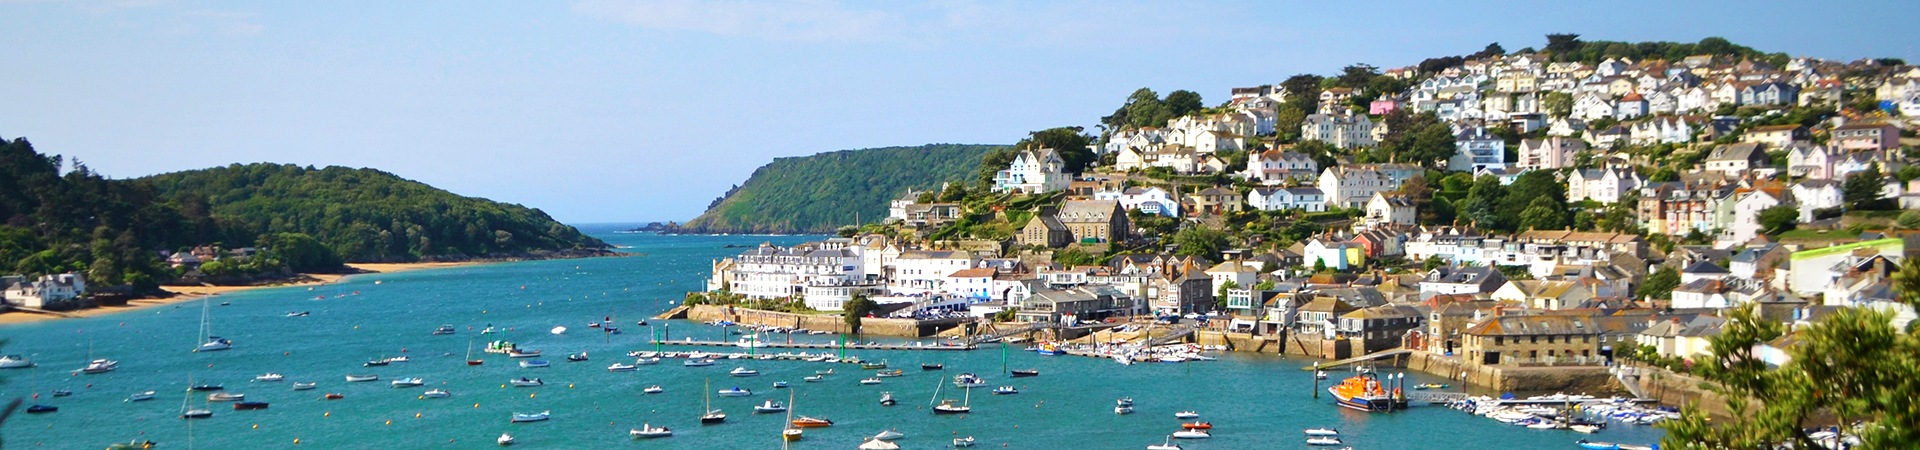 Self-catering holiday in Devon